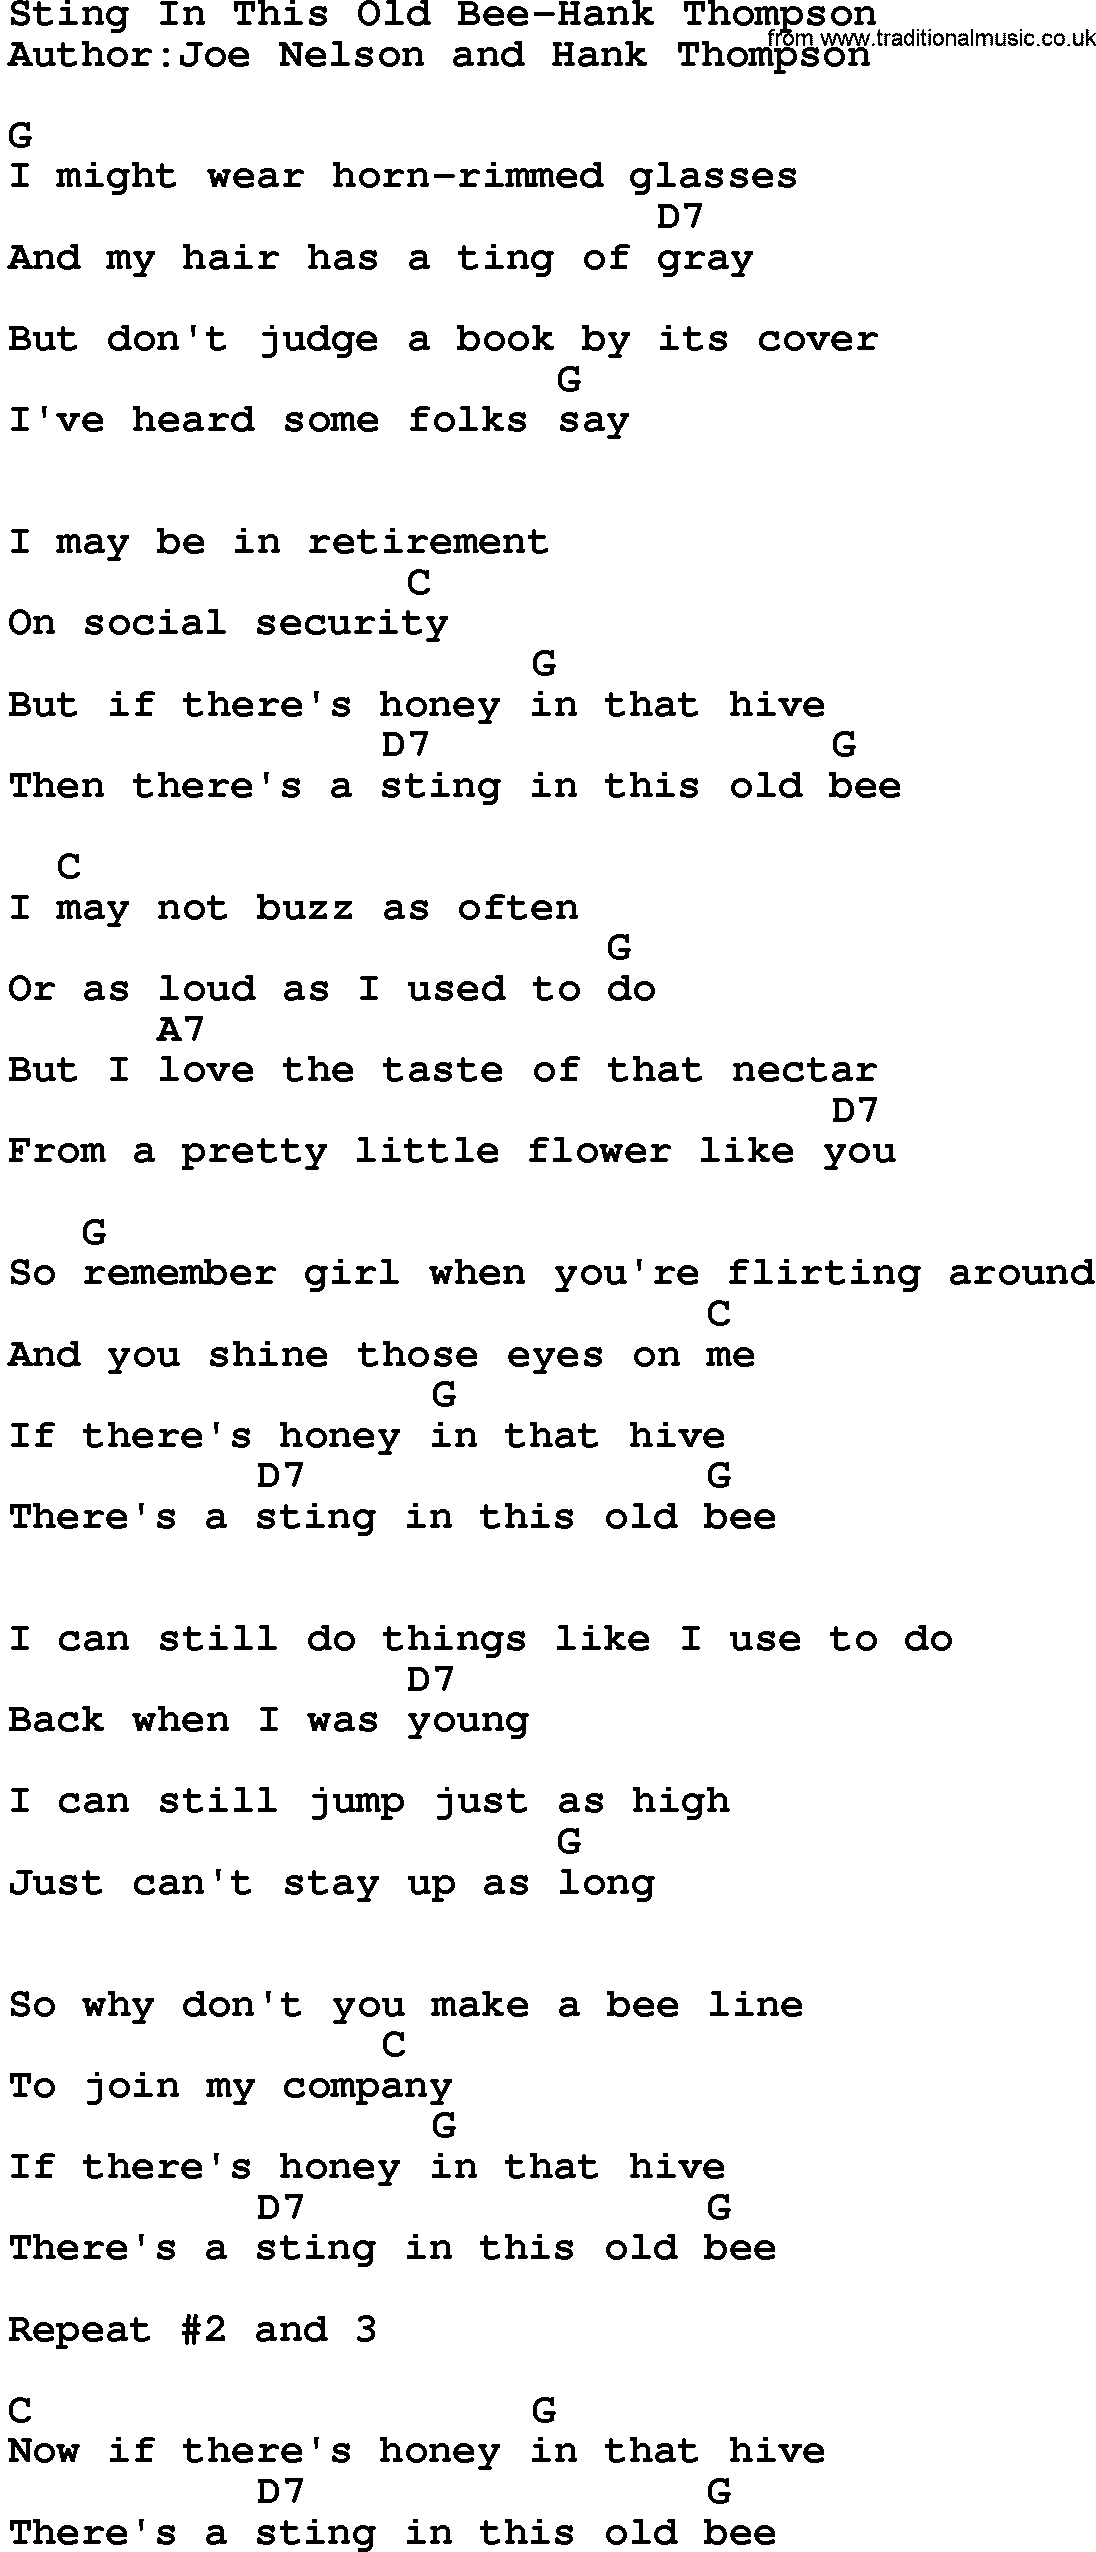 Country music song: Sting In This Old Bee-Hank Thompson lyrics and chords